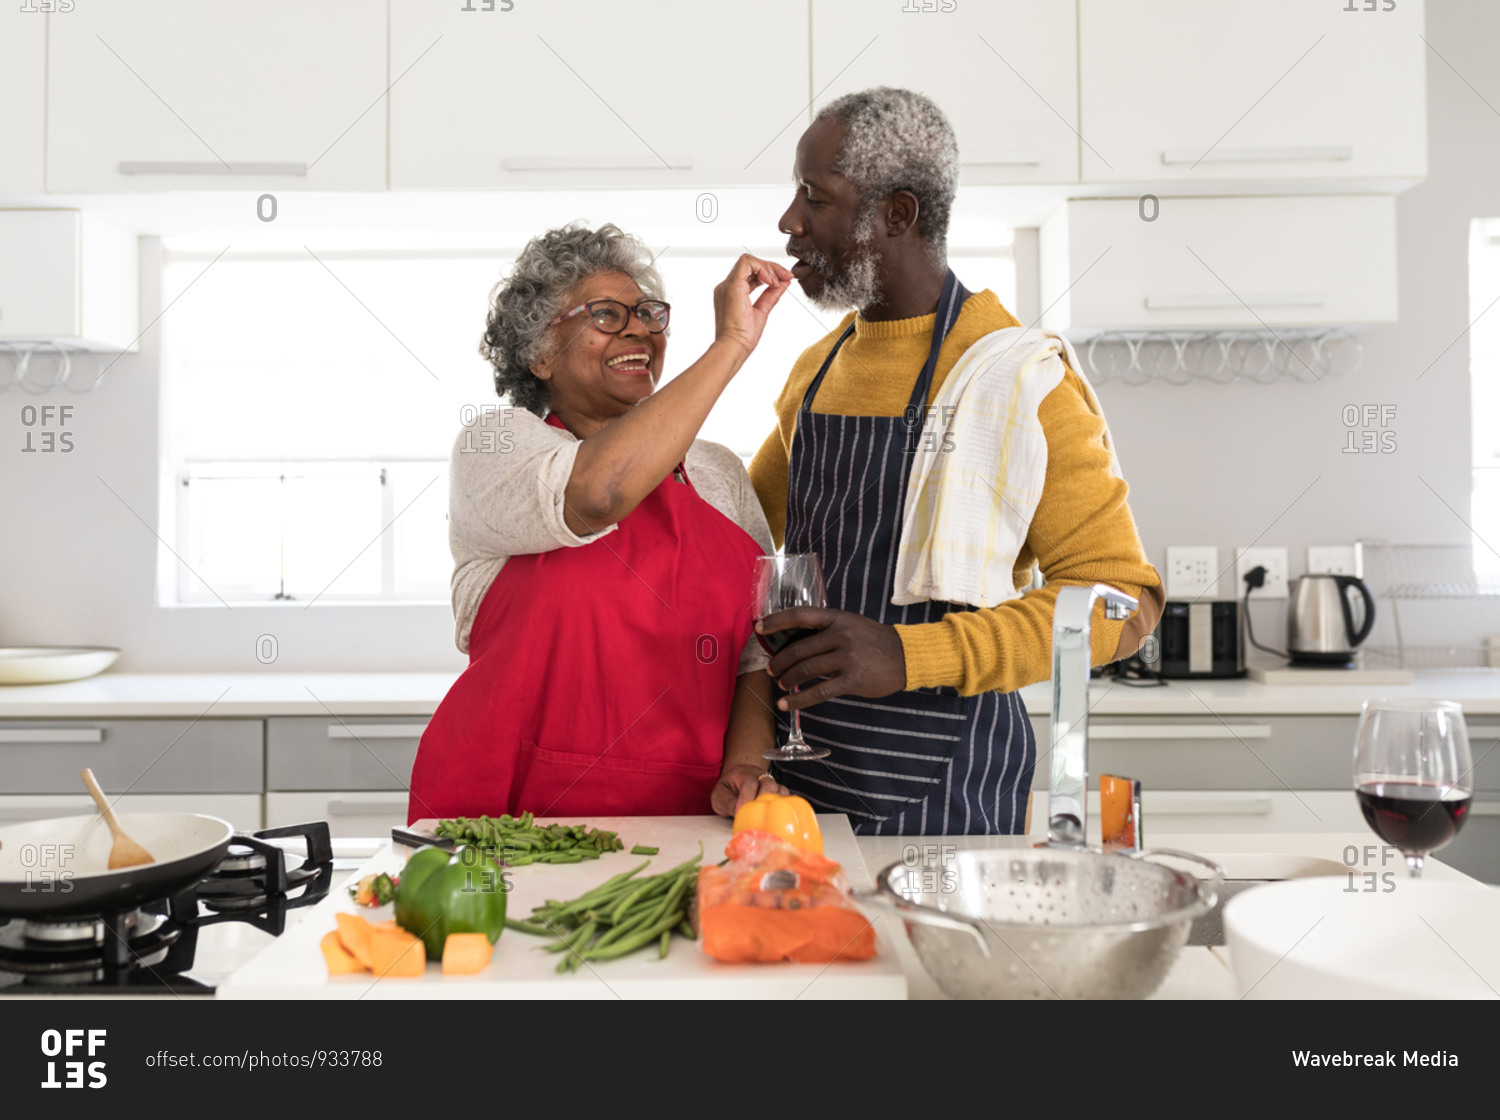 A senior African American couple spending time at home together, social distancing and self isolation in quarantine lockdown during coronavirus covid 19 epidemic, standing in the kitchen preparing food, the man holding glasses of red wine